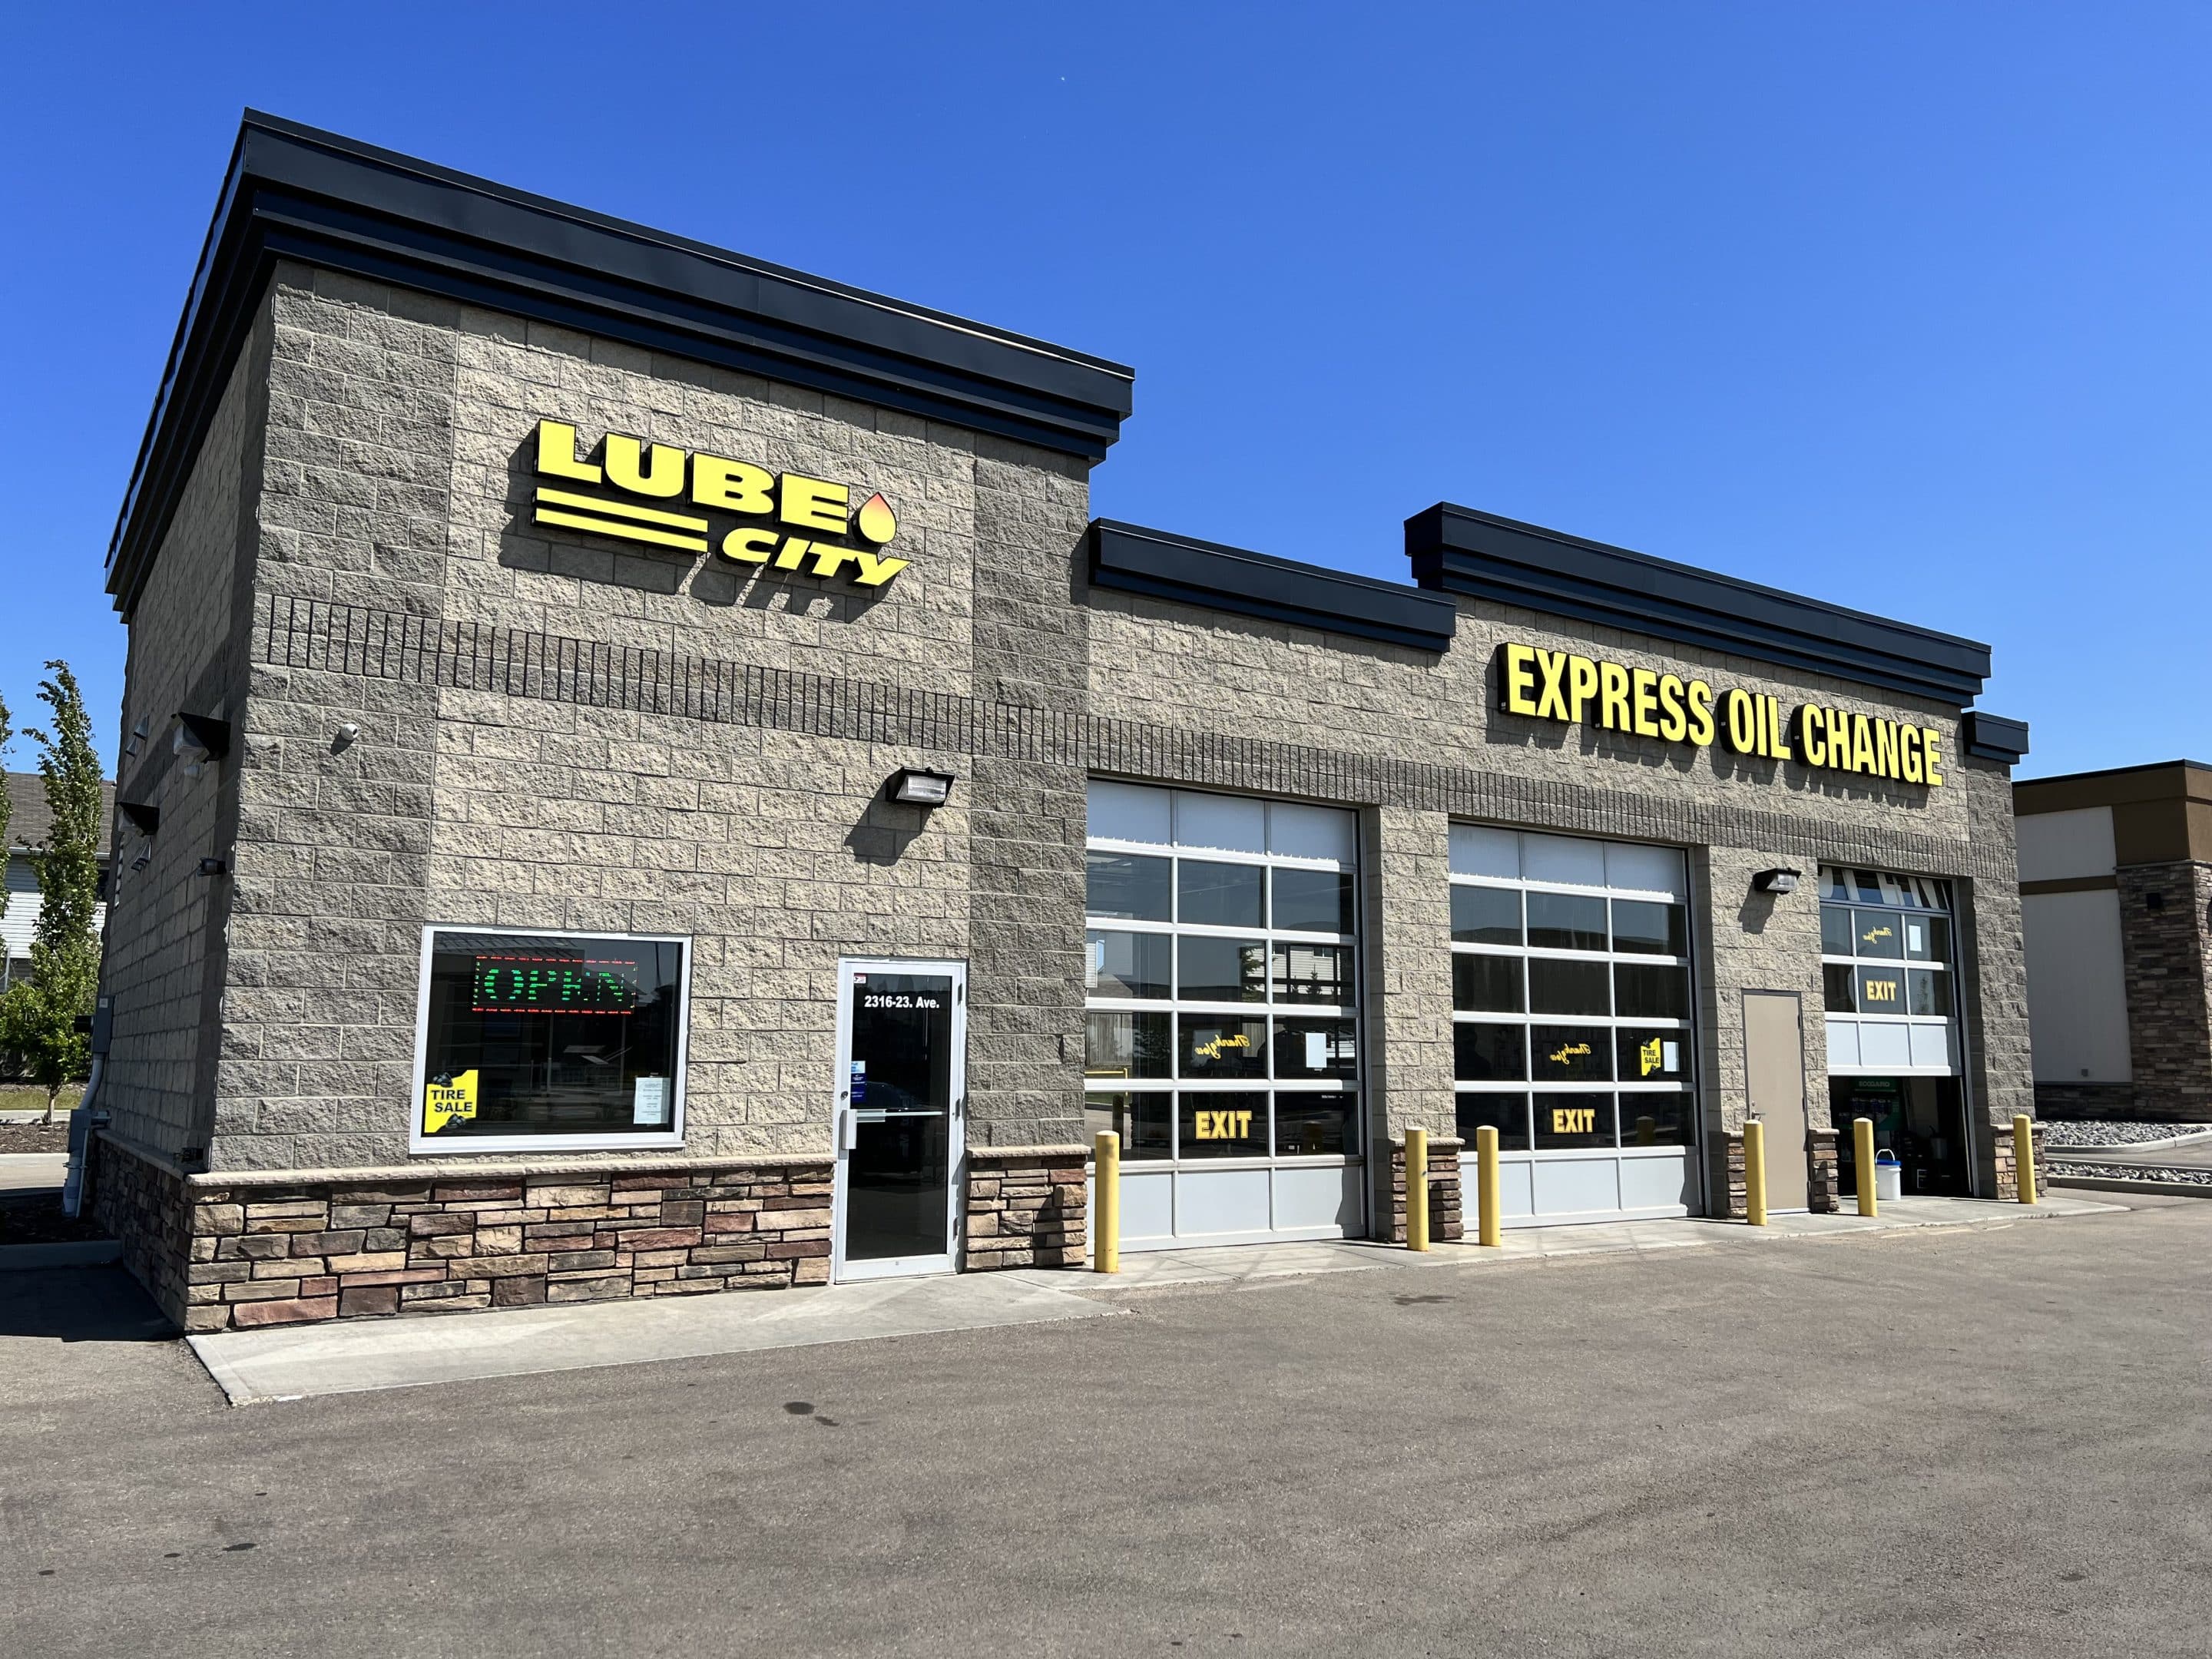 Edmonton Express Oil Change Location - 2316 23 Ave NW - Meadows